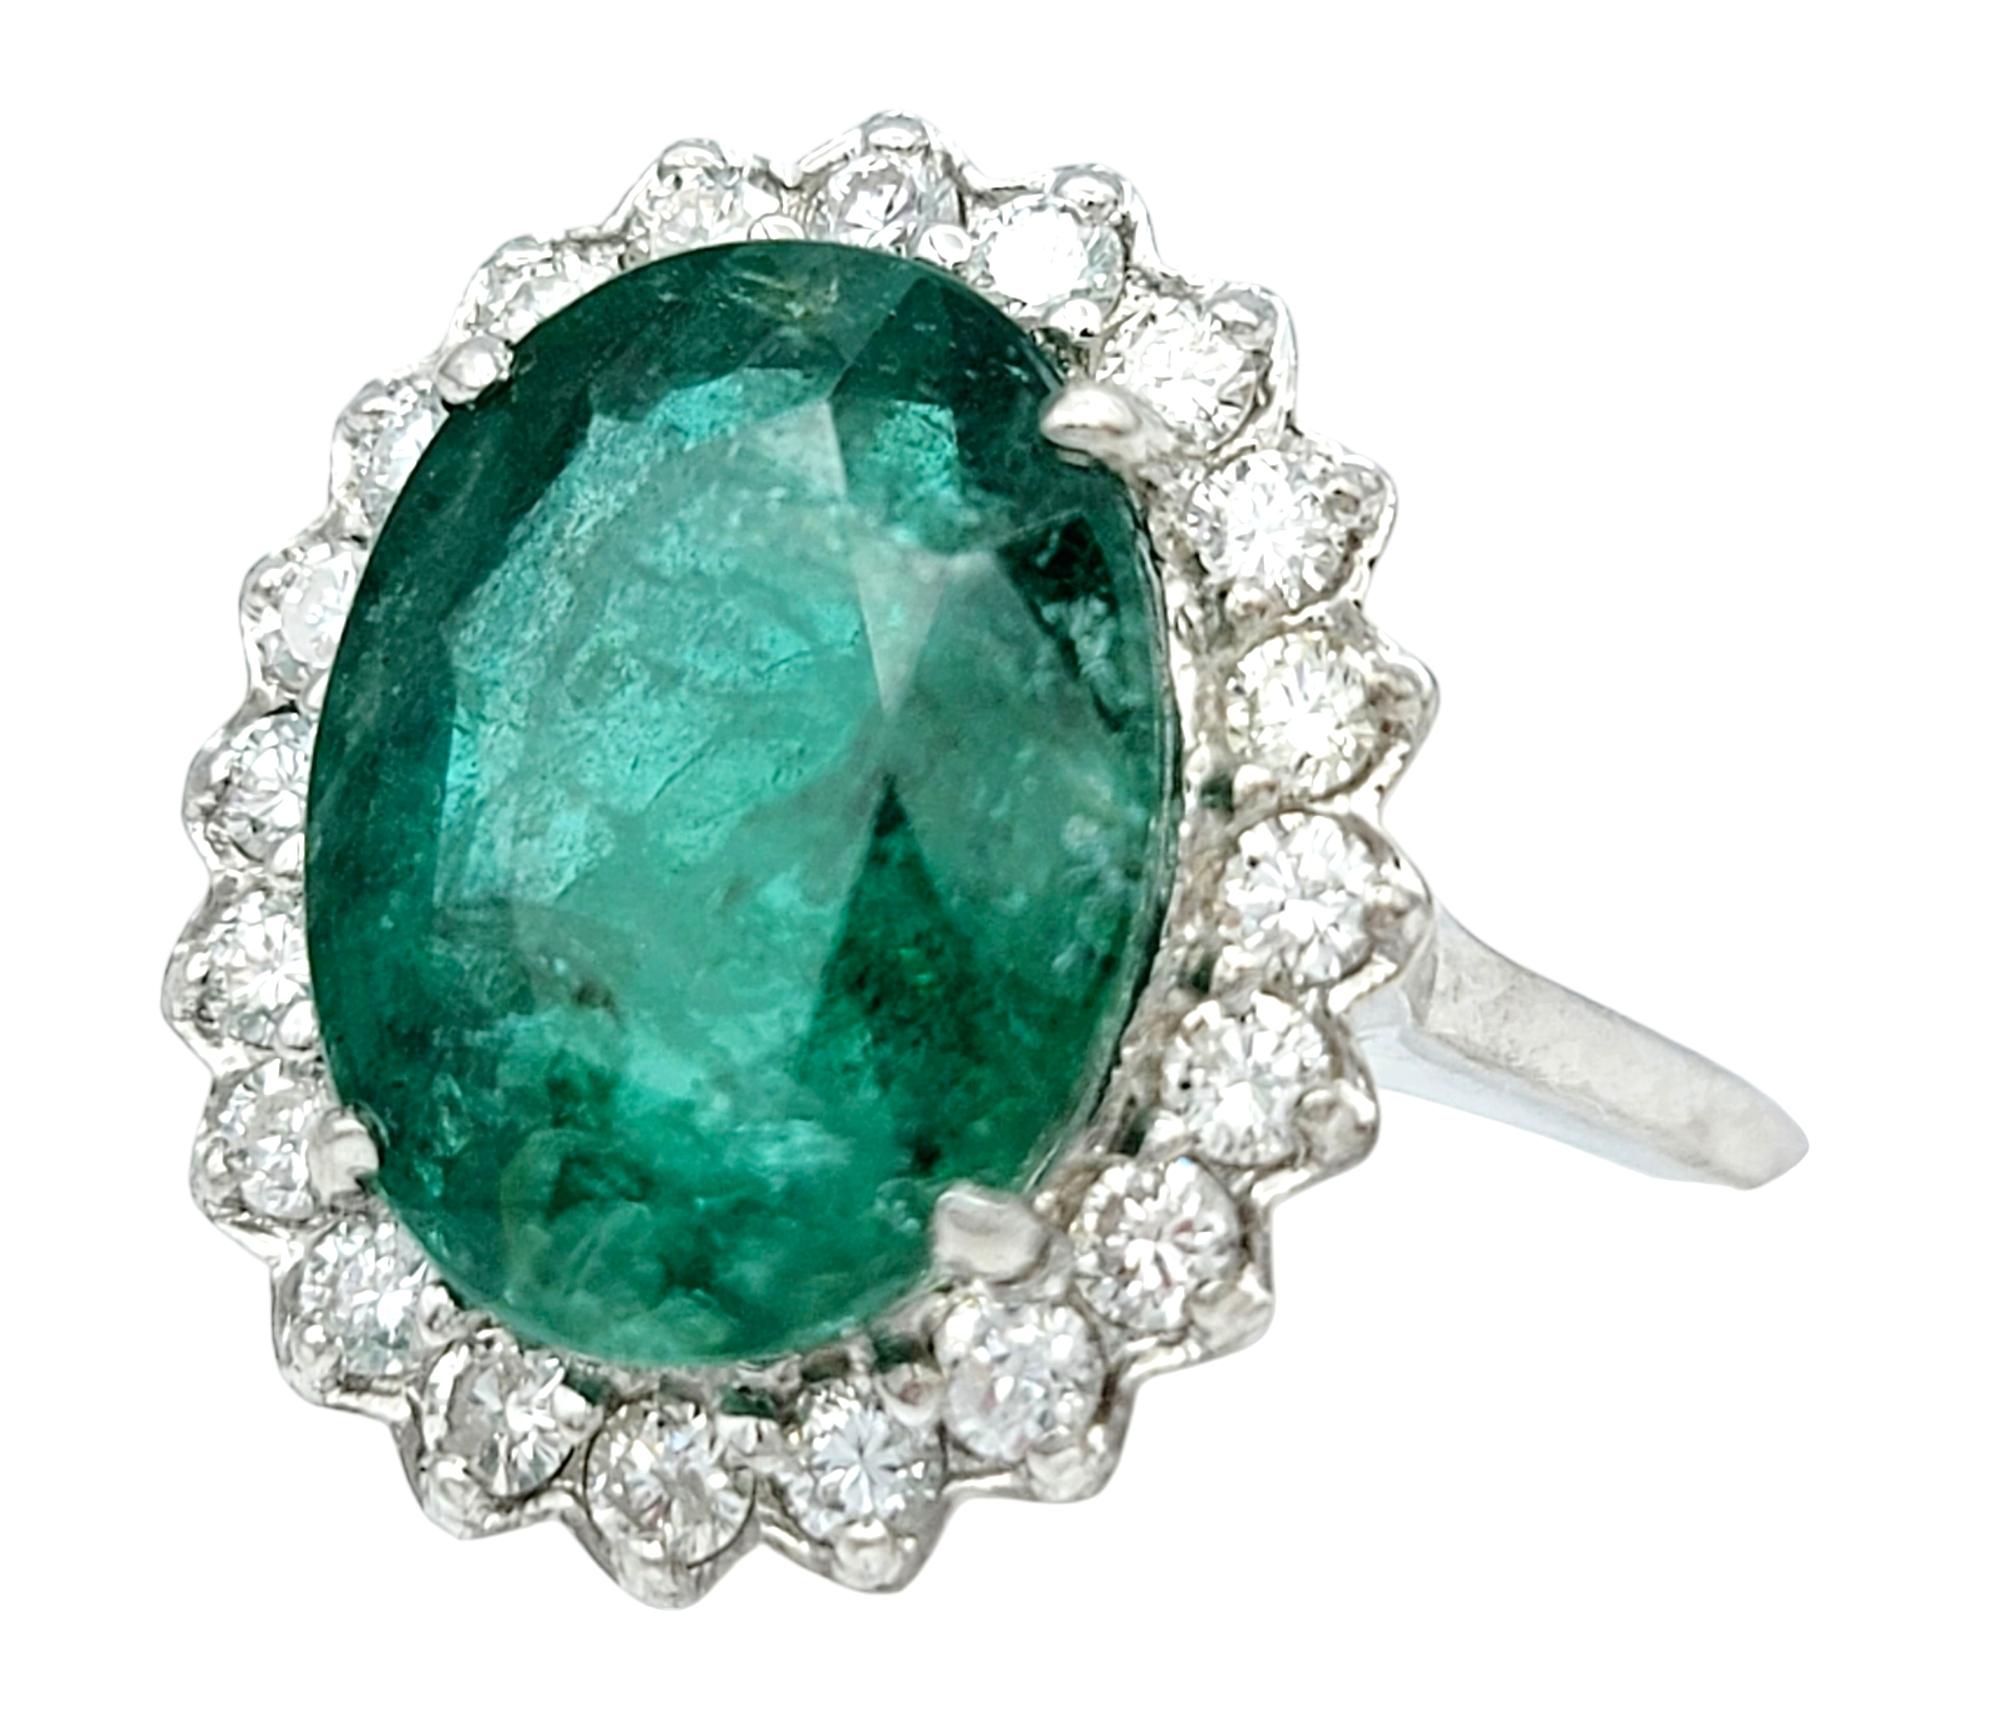 4.98 Carat Oval Cut Emerald and Diamond Halo Ring Set in 18 Karat White Gold In Good Condition For Sale In Scottsdale, AZ